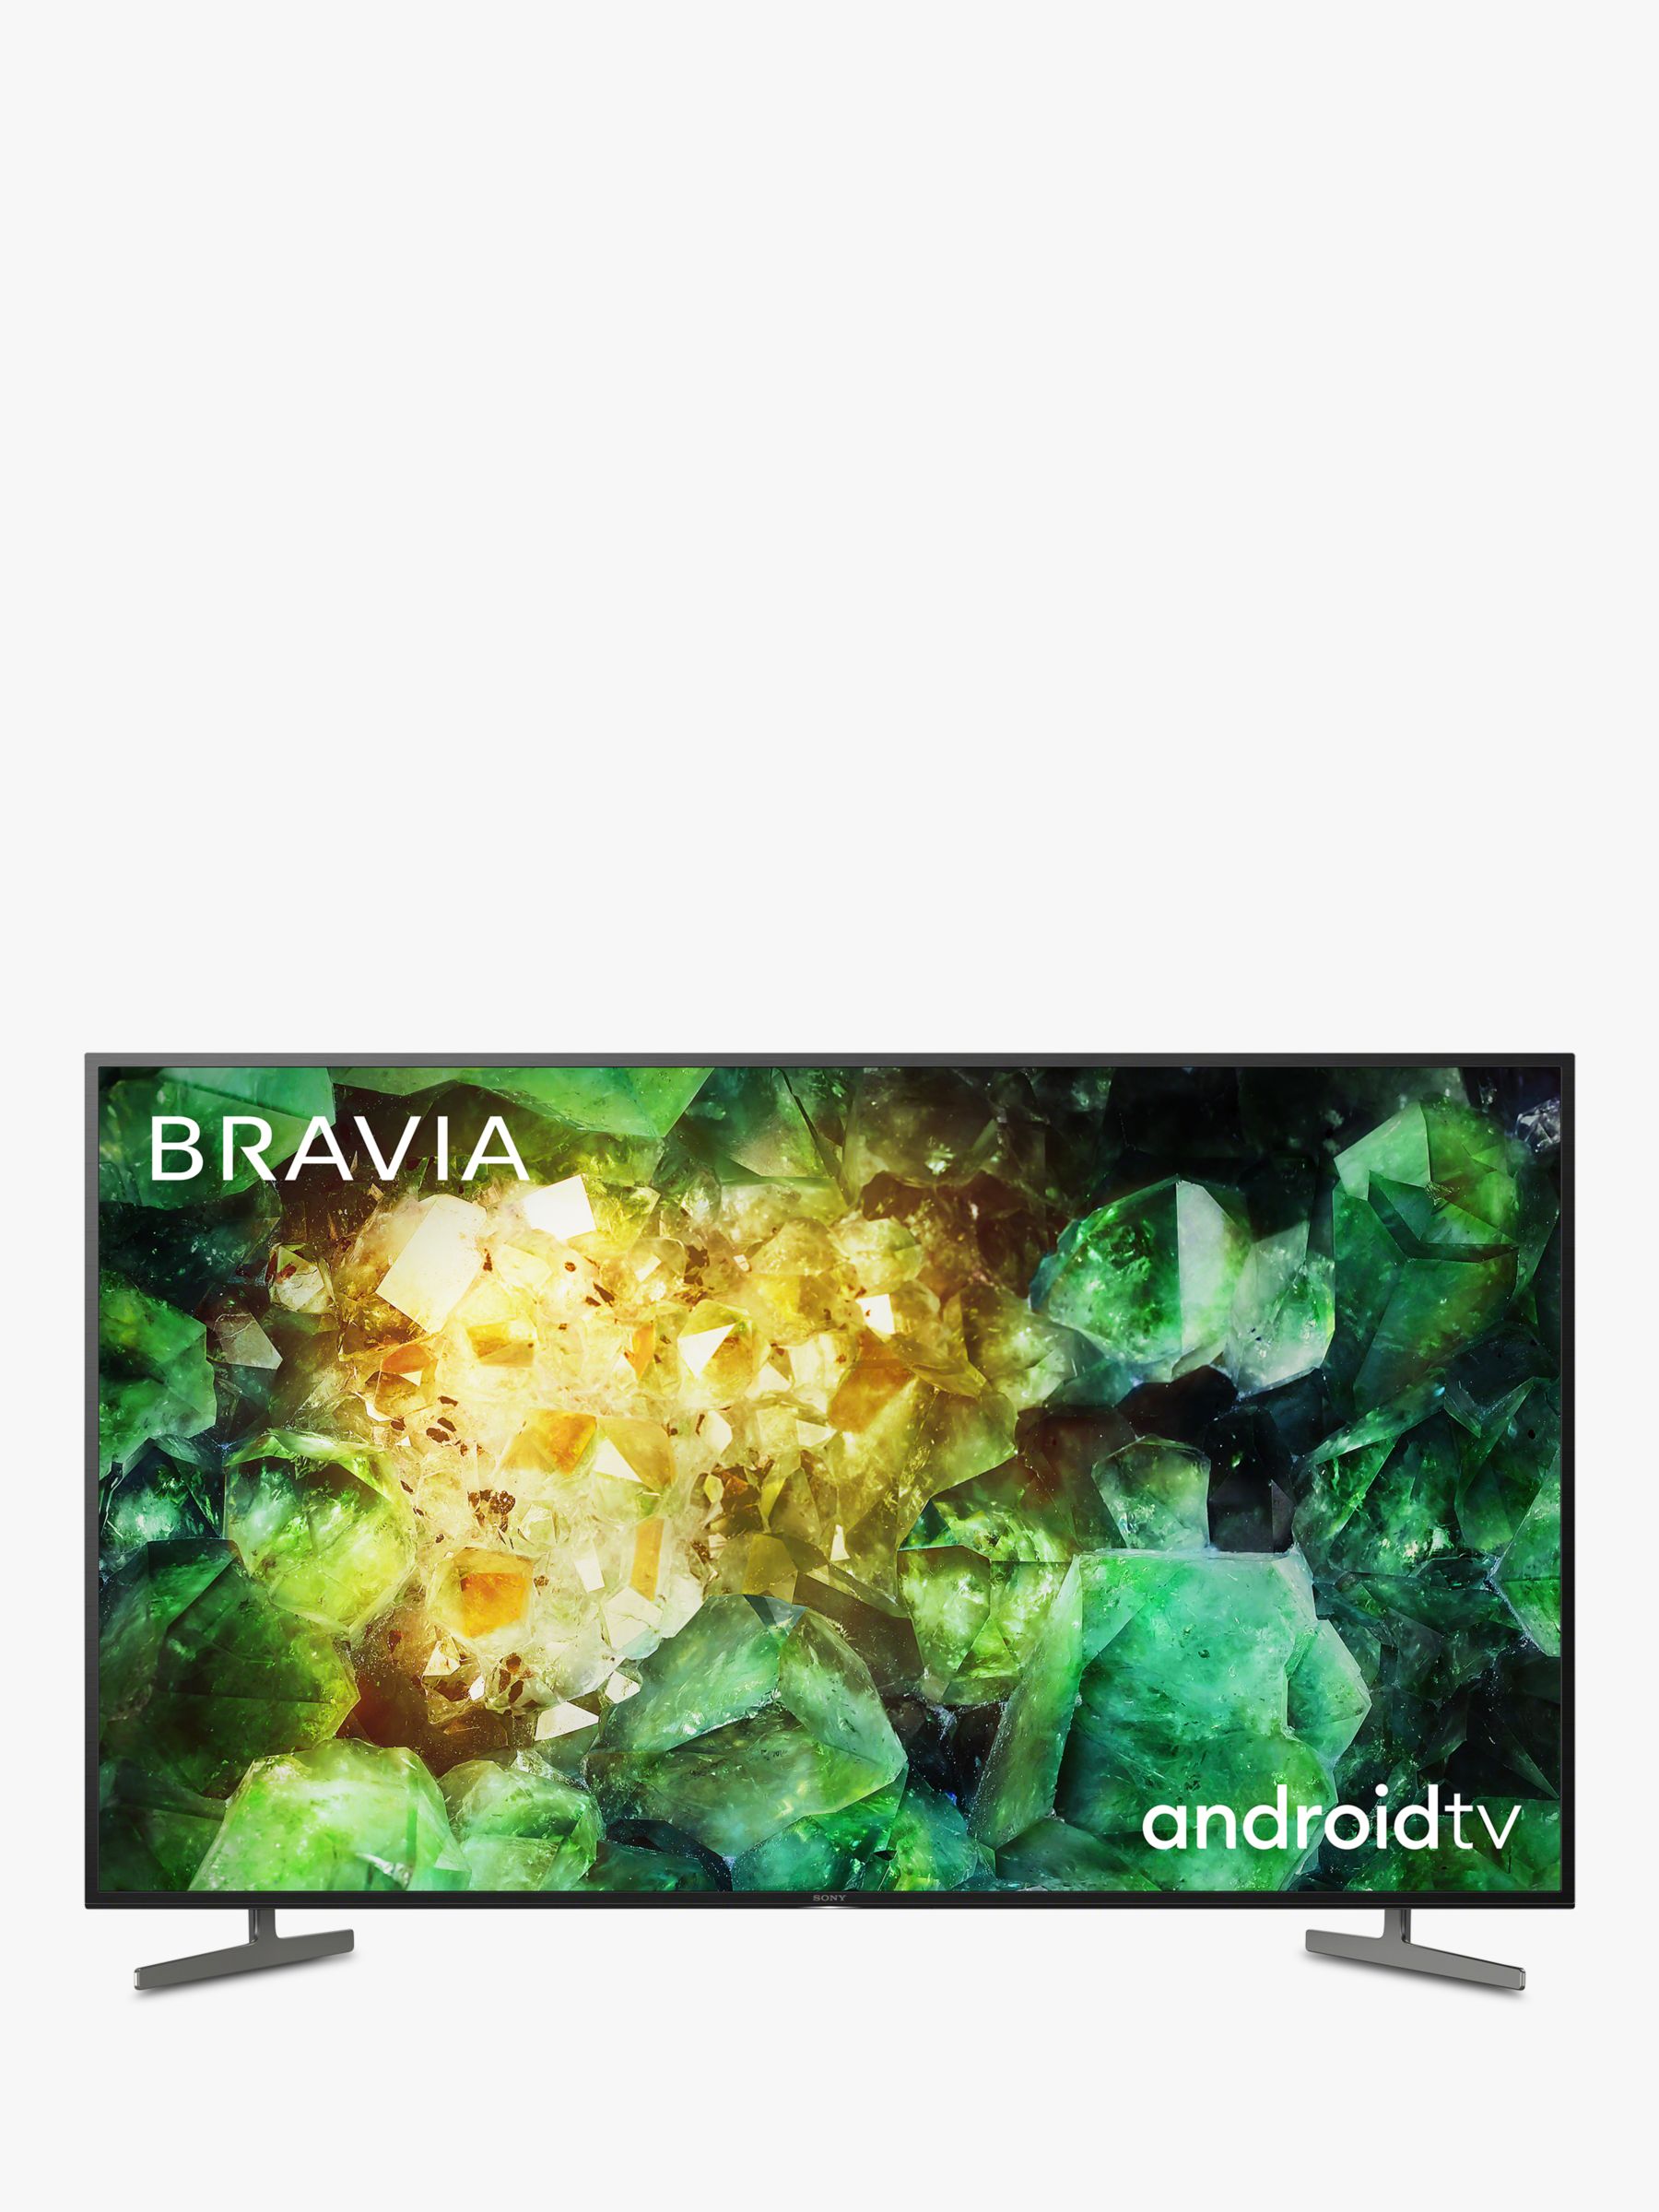 Sony Bravia KD55XH8196 (2020) LED HDR 4K Ultra HD Smart Android TV, 55 inch with Freeview HD ...